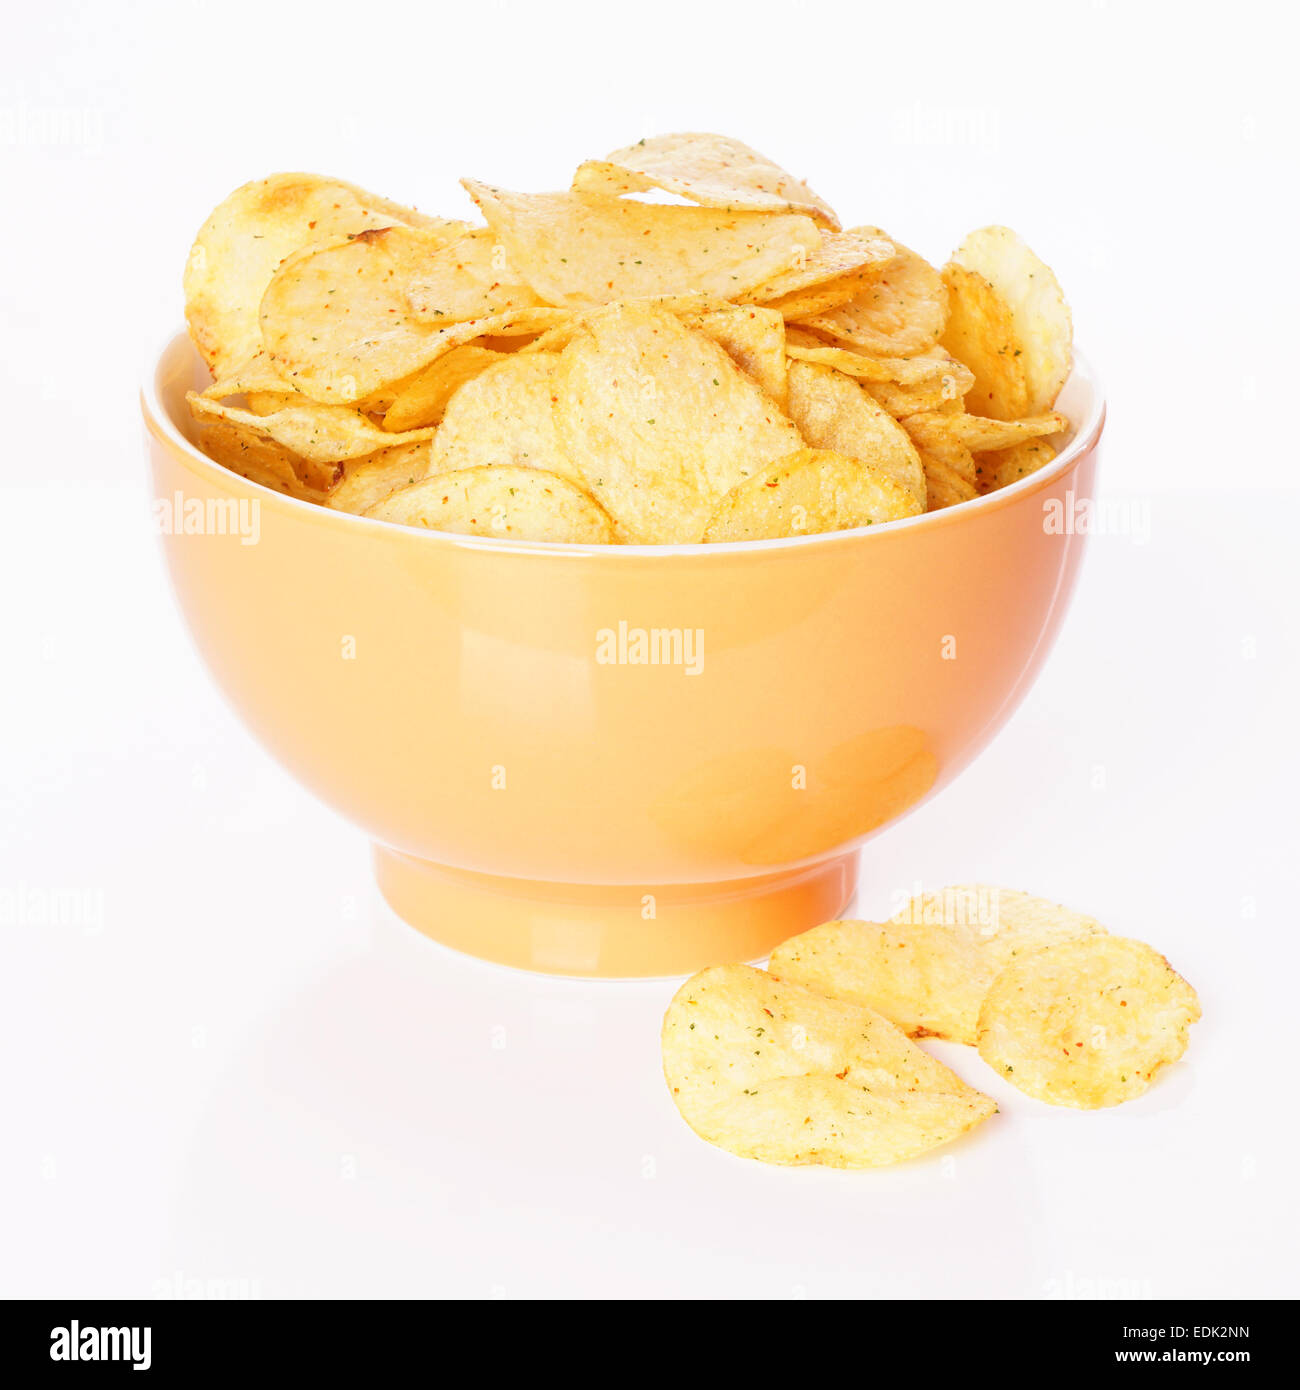 chips or crisps Stock Photo